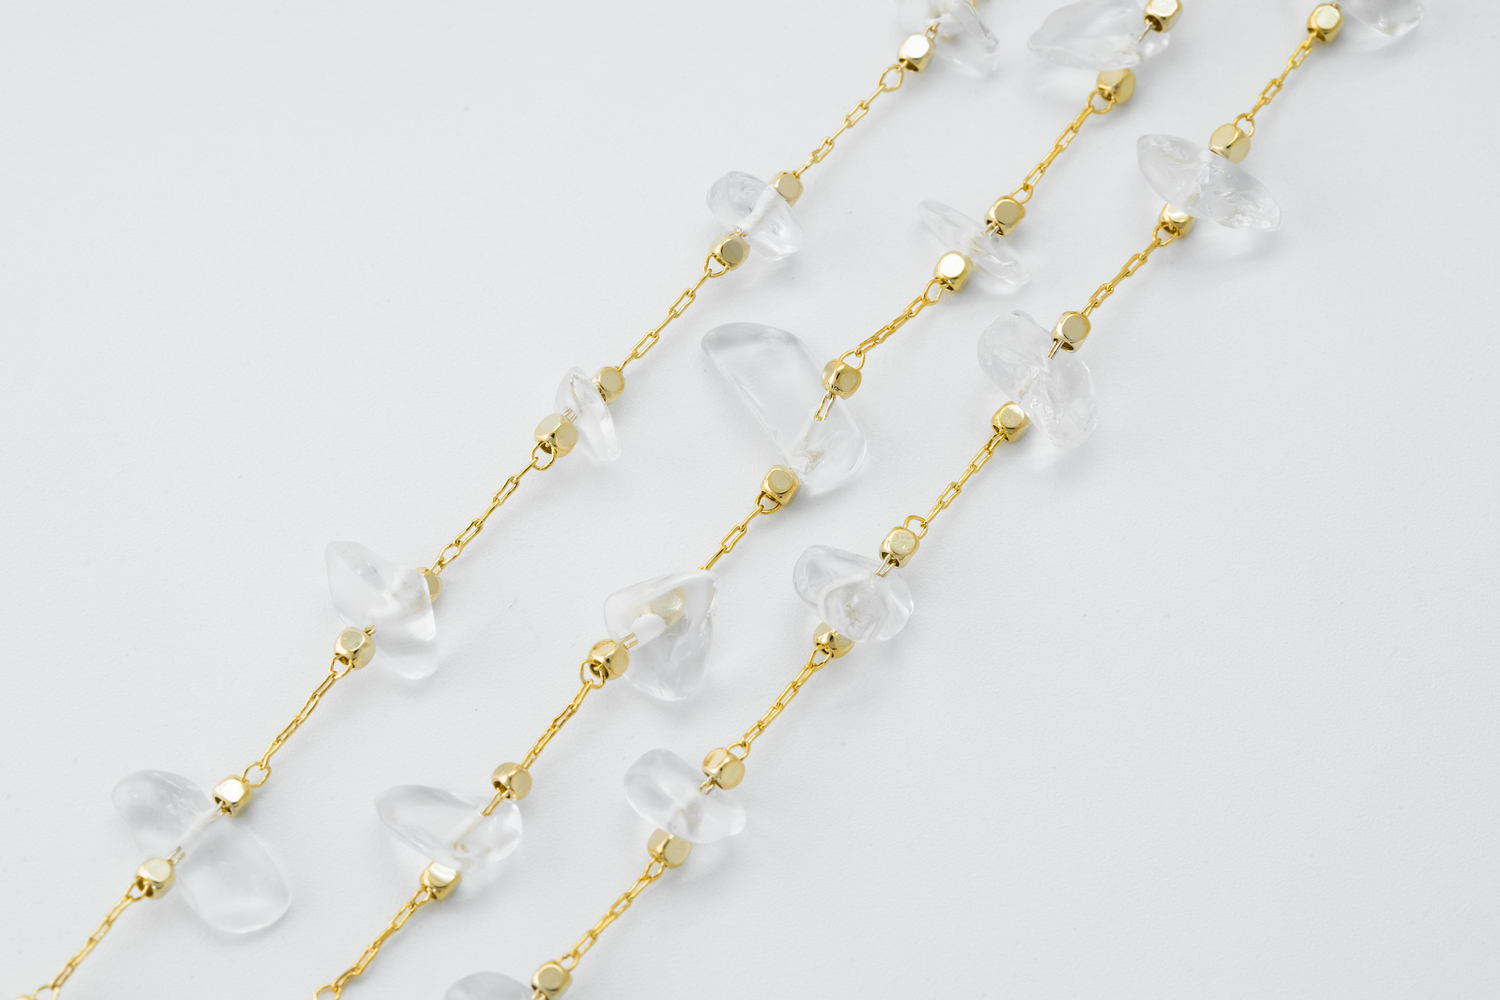 [CJ53-04] Rock crystal chain, Brass, White crystal, Nickel free, Beads chain, Dainty chain, Beaded chain, Necklace makings, 1m